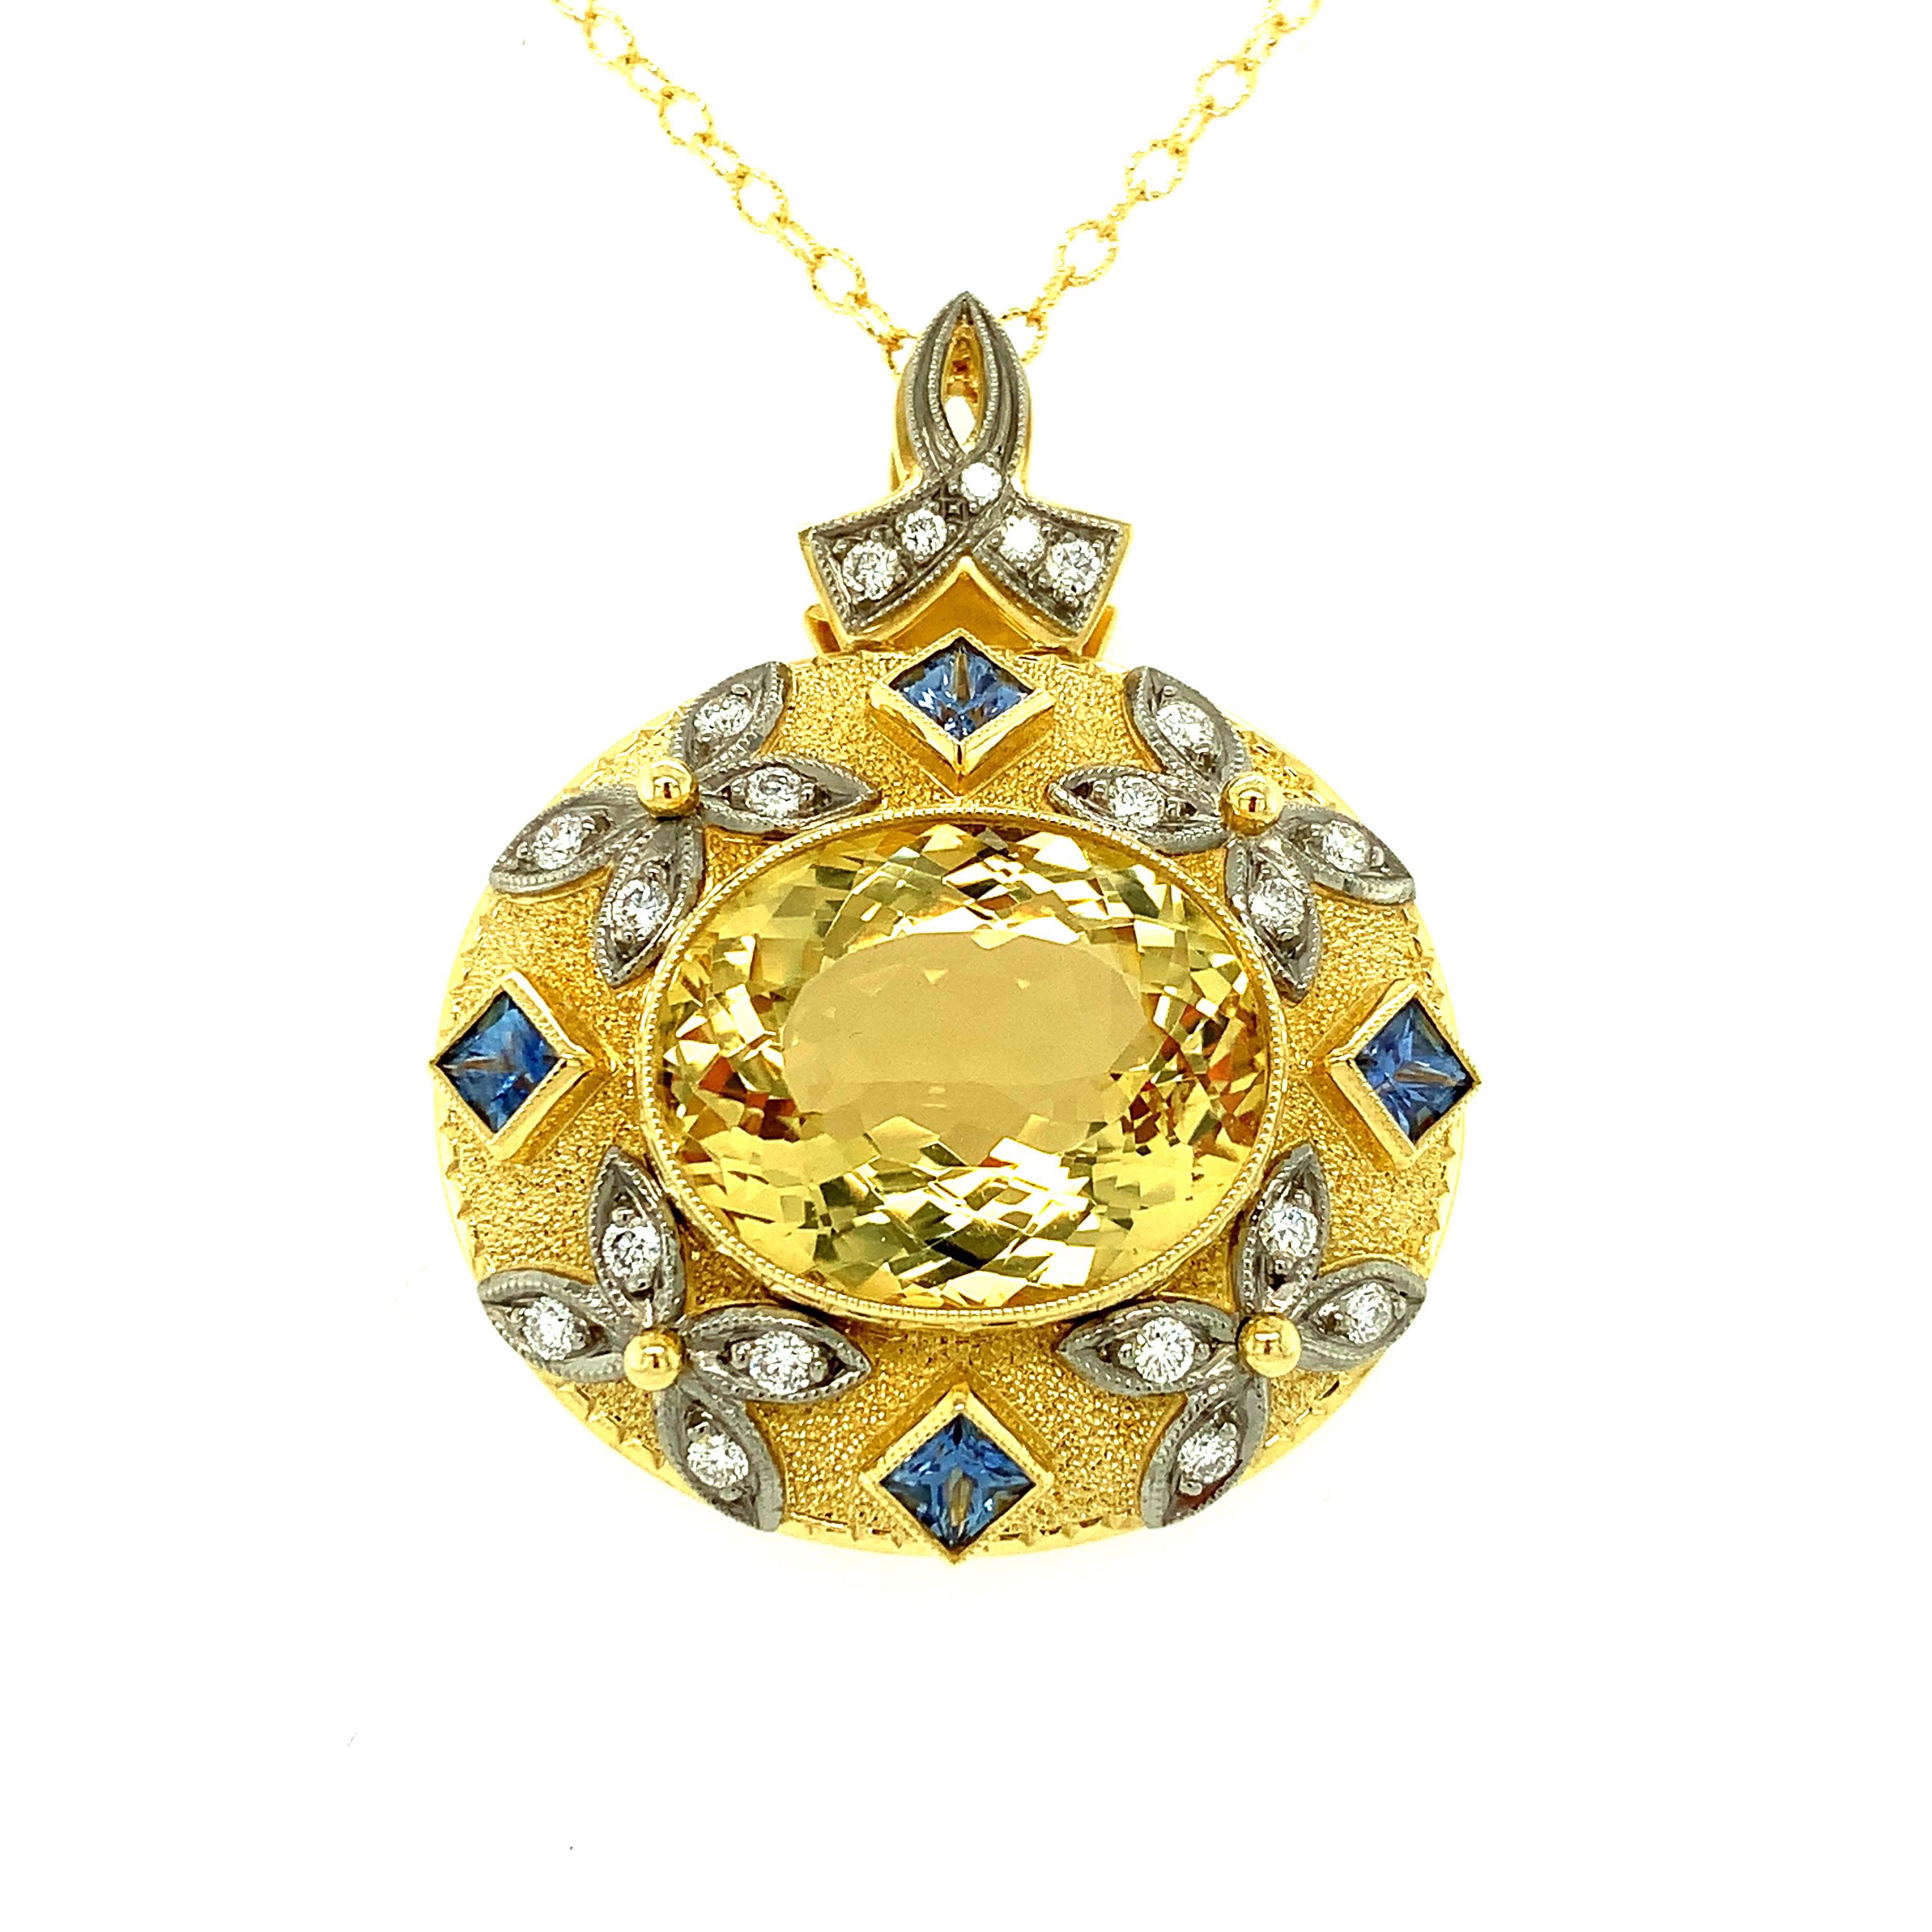 This Renaissance-inspired pendant features a large, 12 carat sparkling chrysoberyl with blue sapphires and diamonds set in 18k white and yellow gold. Faceted chrysoberyl may not be as famous as its color-change cousin, alexandrite, but gem